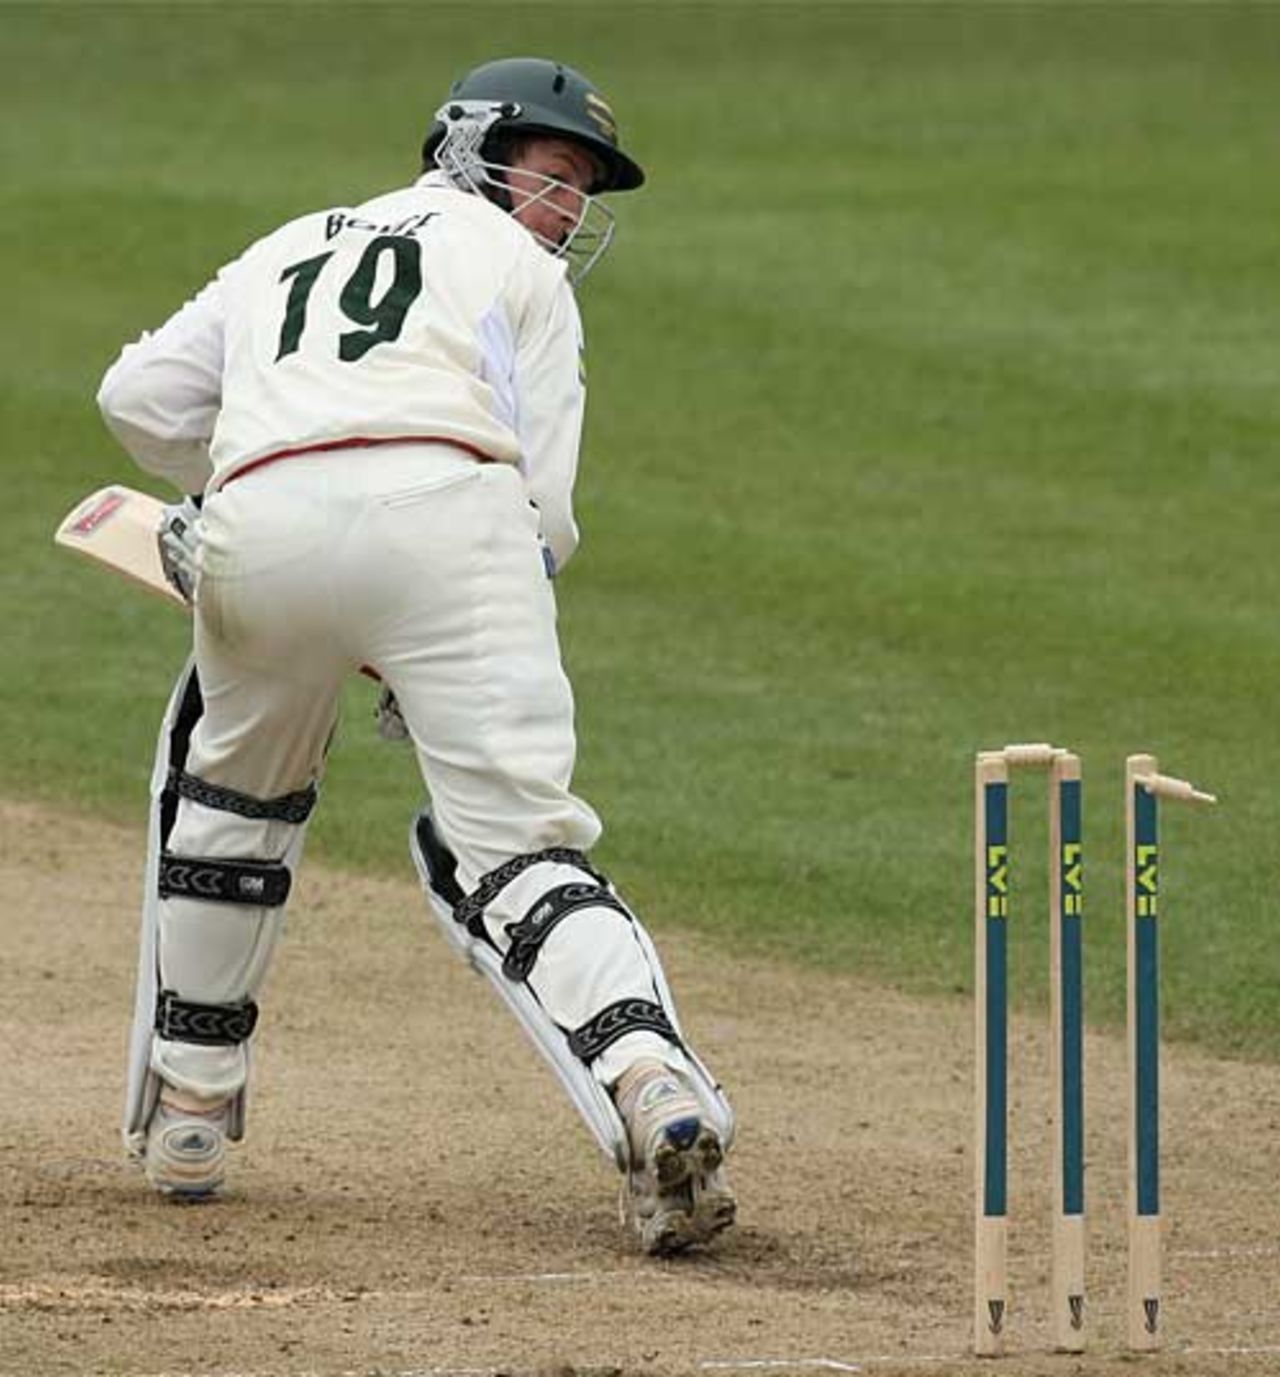 Don't look back: Matthew Boyce turns around as he is bowled, Worcestershire v Leicestershire, County Championship, New Road, April 25, 2008